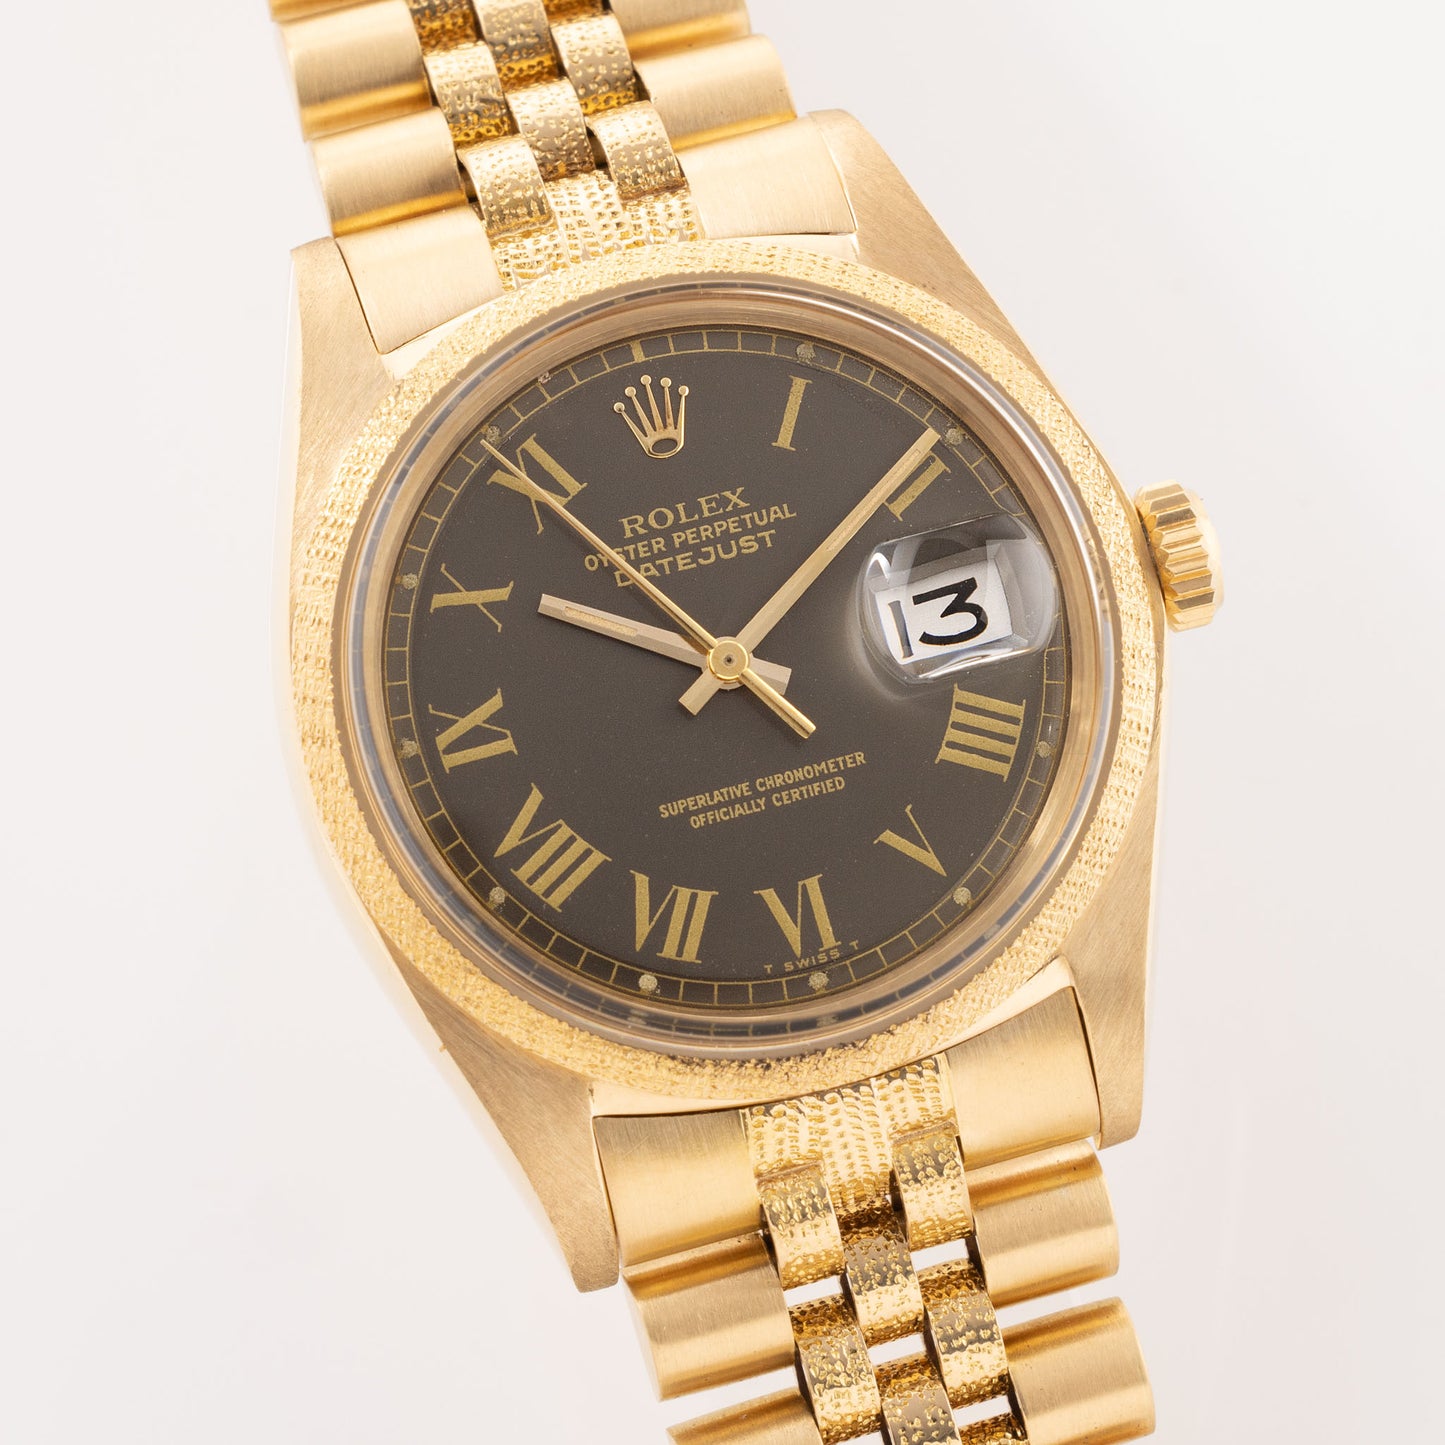 Rolex Datejust Colour changed Buckley dial Morellis finish ref 1611 Box and papers set